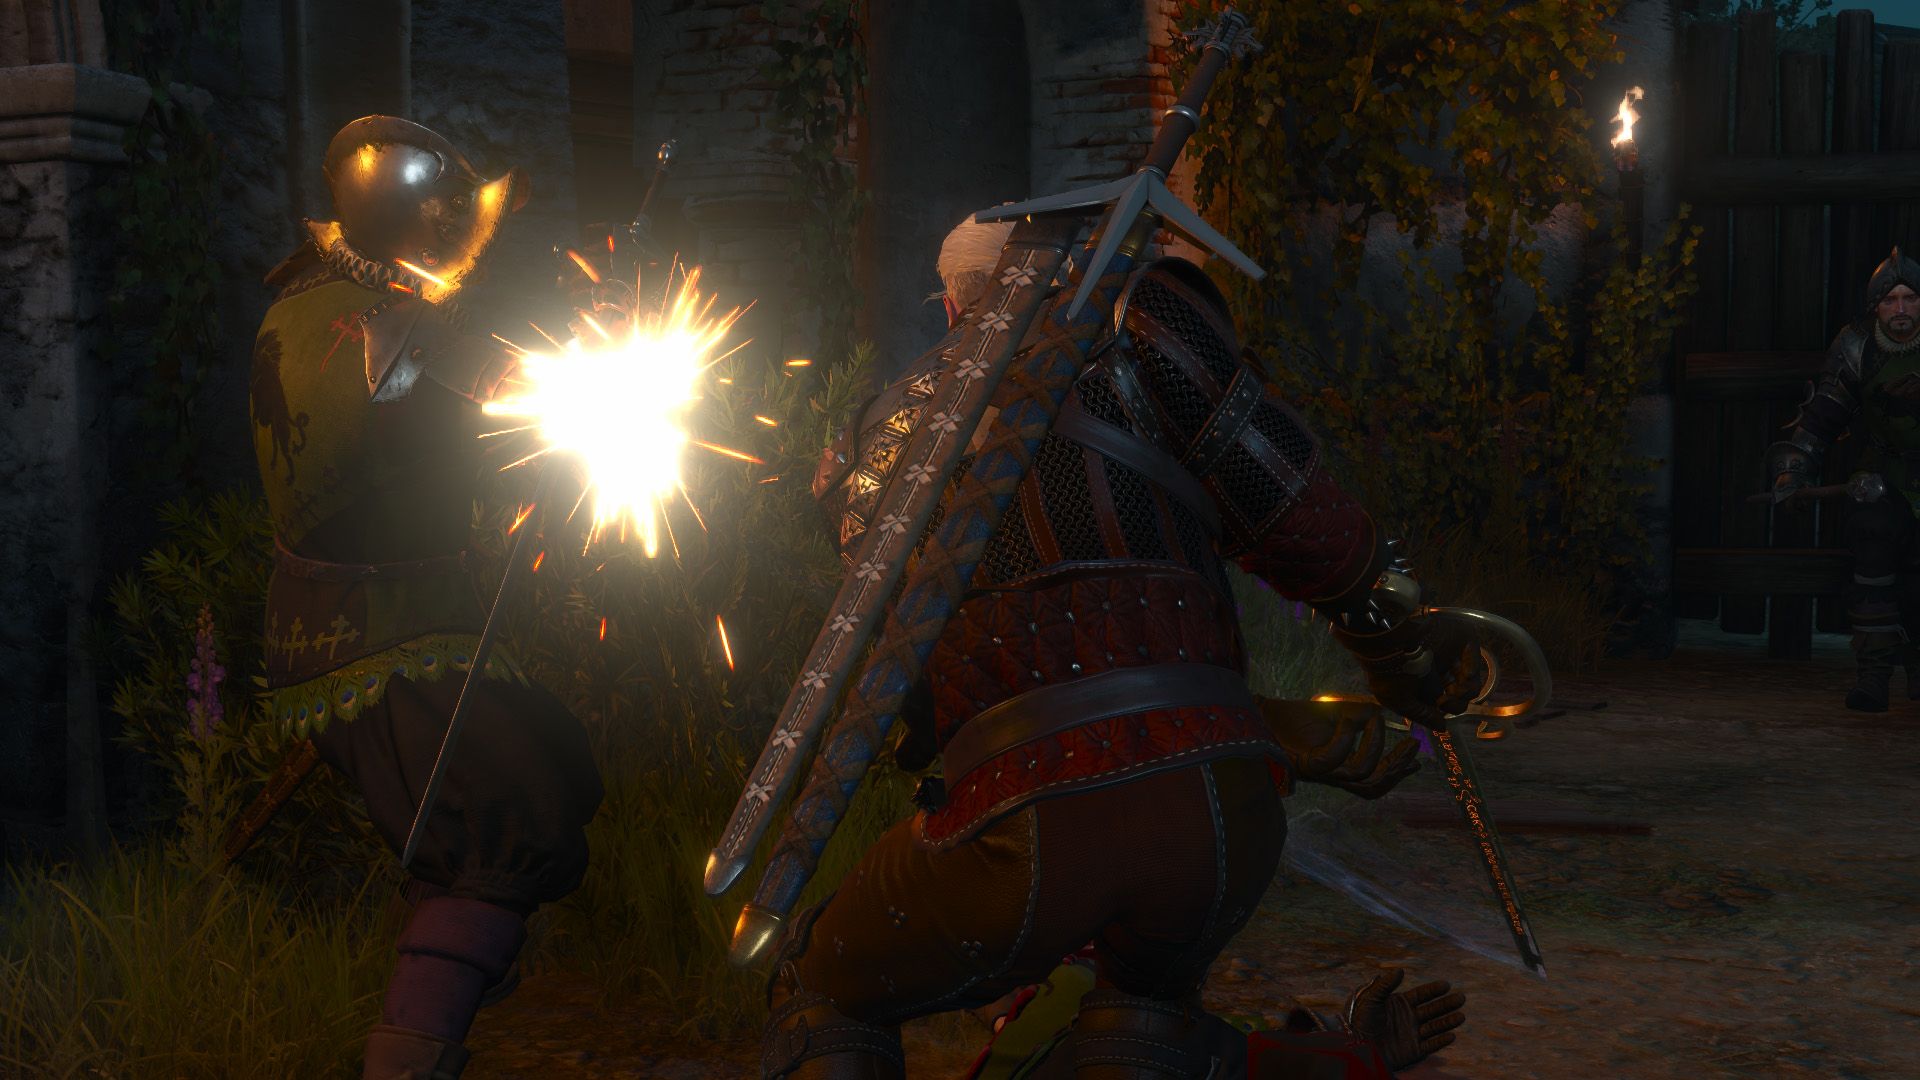 Geralt's swing is parried by a metal-helmeted guard.